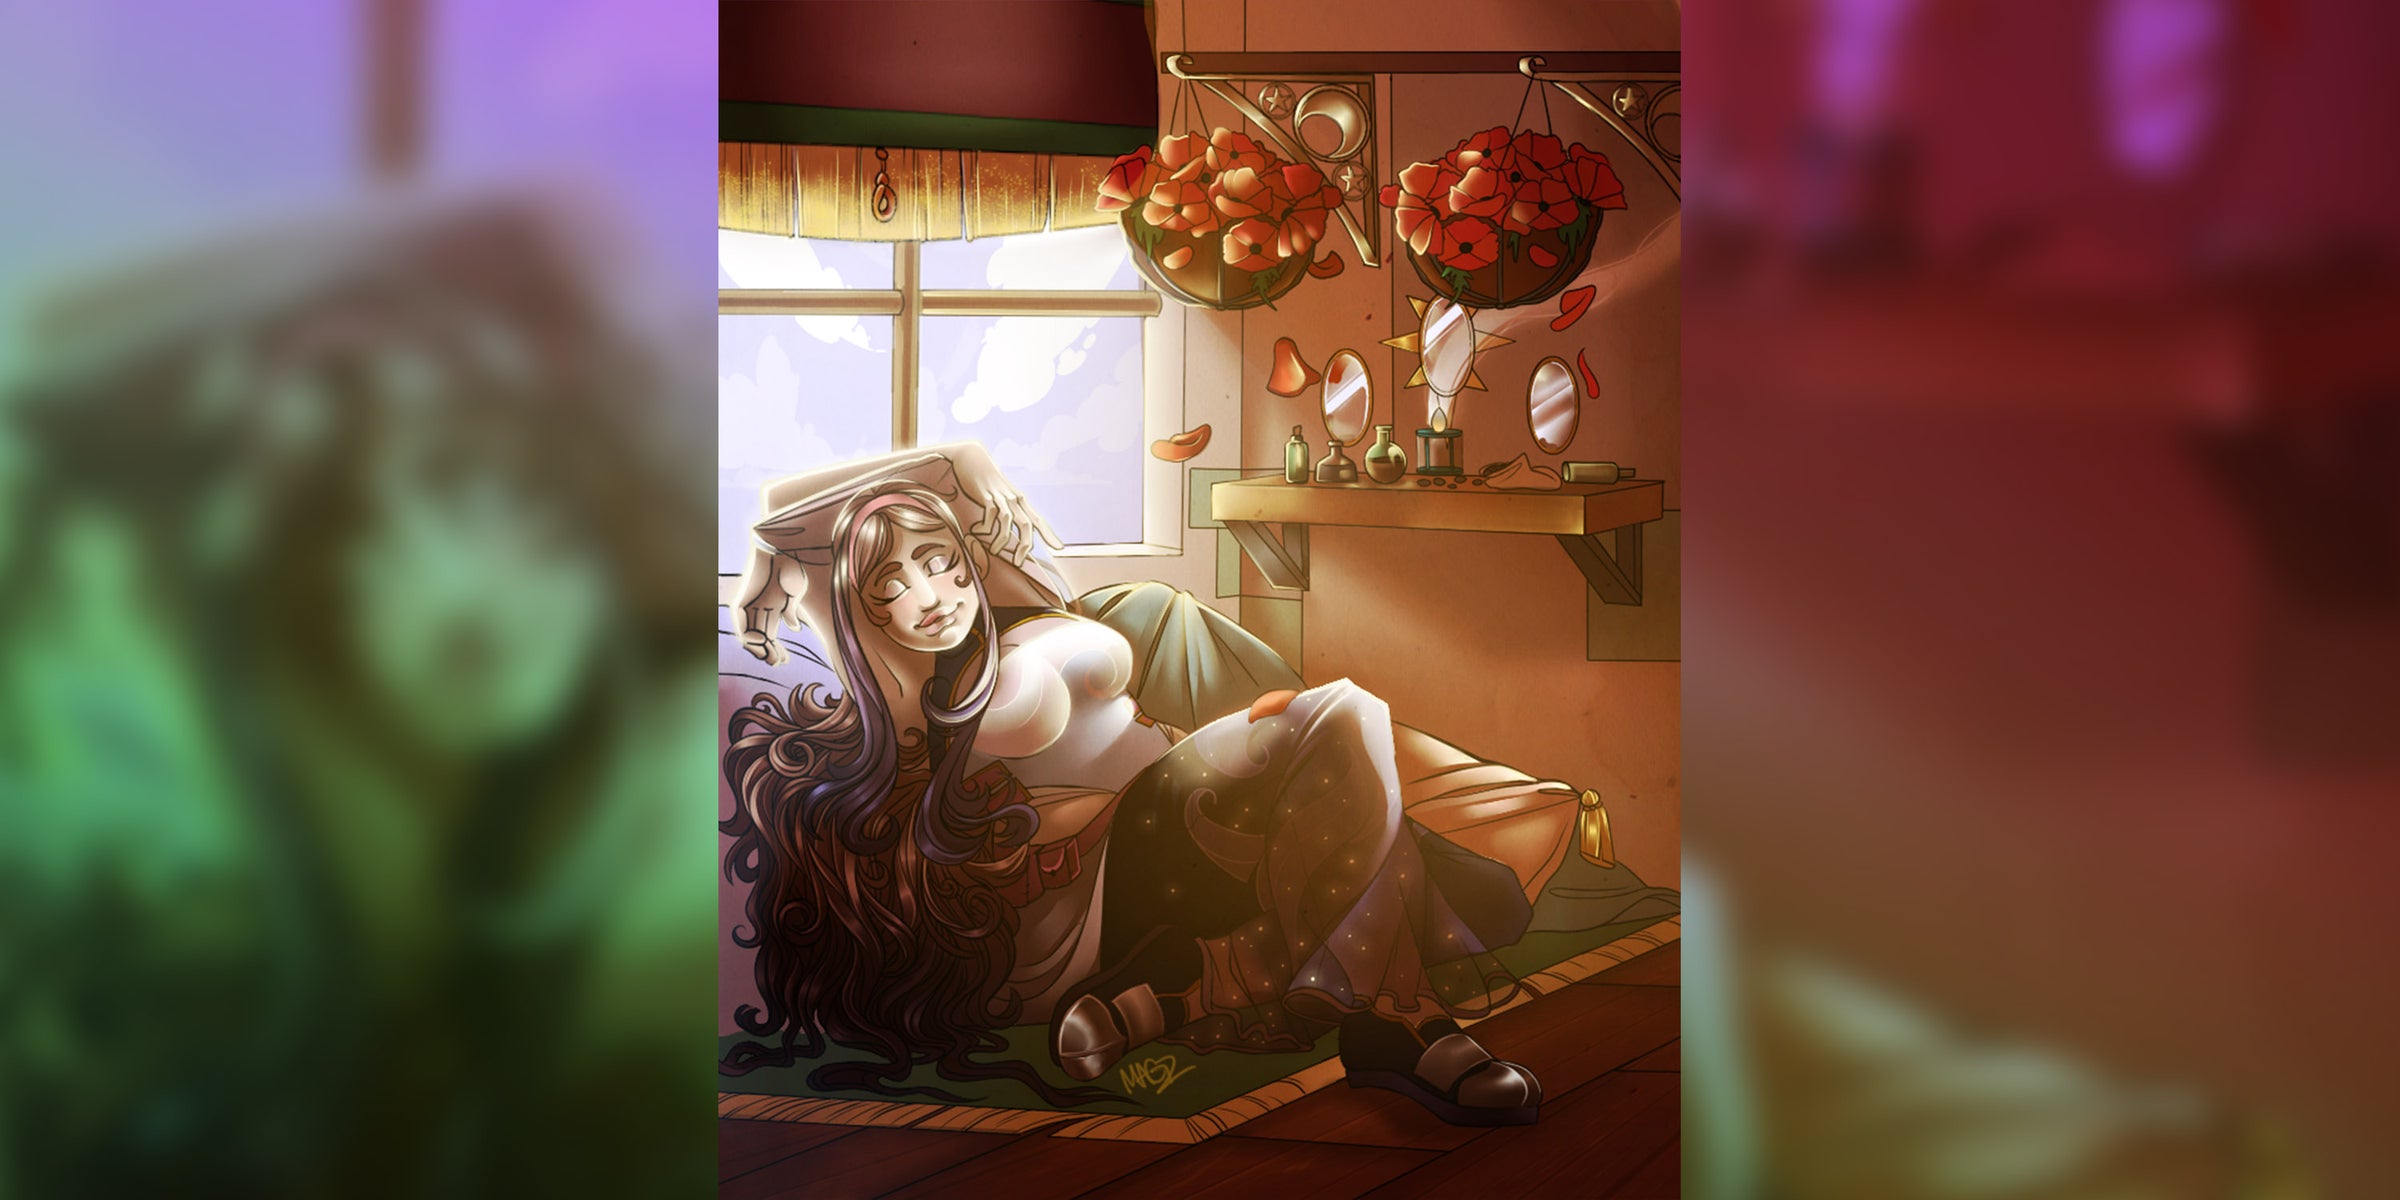 Art of Marigold sleeping in a comfy setup. She is sleeping next to a window, and light is coming in. The image links to a twitter post, https://twitter.com/TEOTLNewAge/status/1570978366521745408.